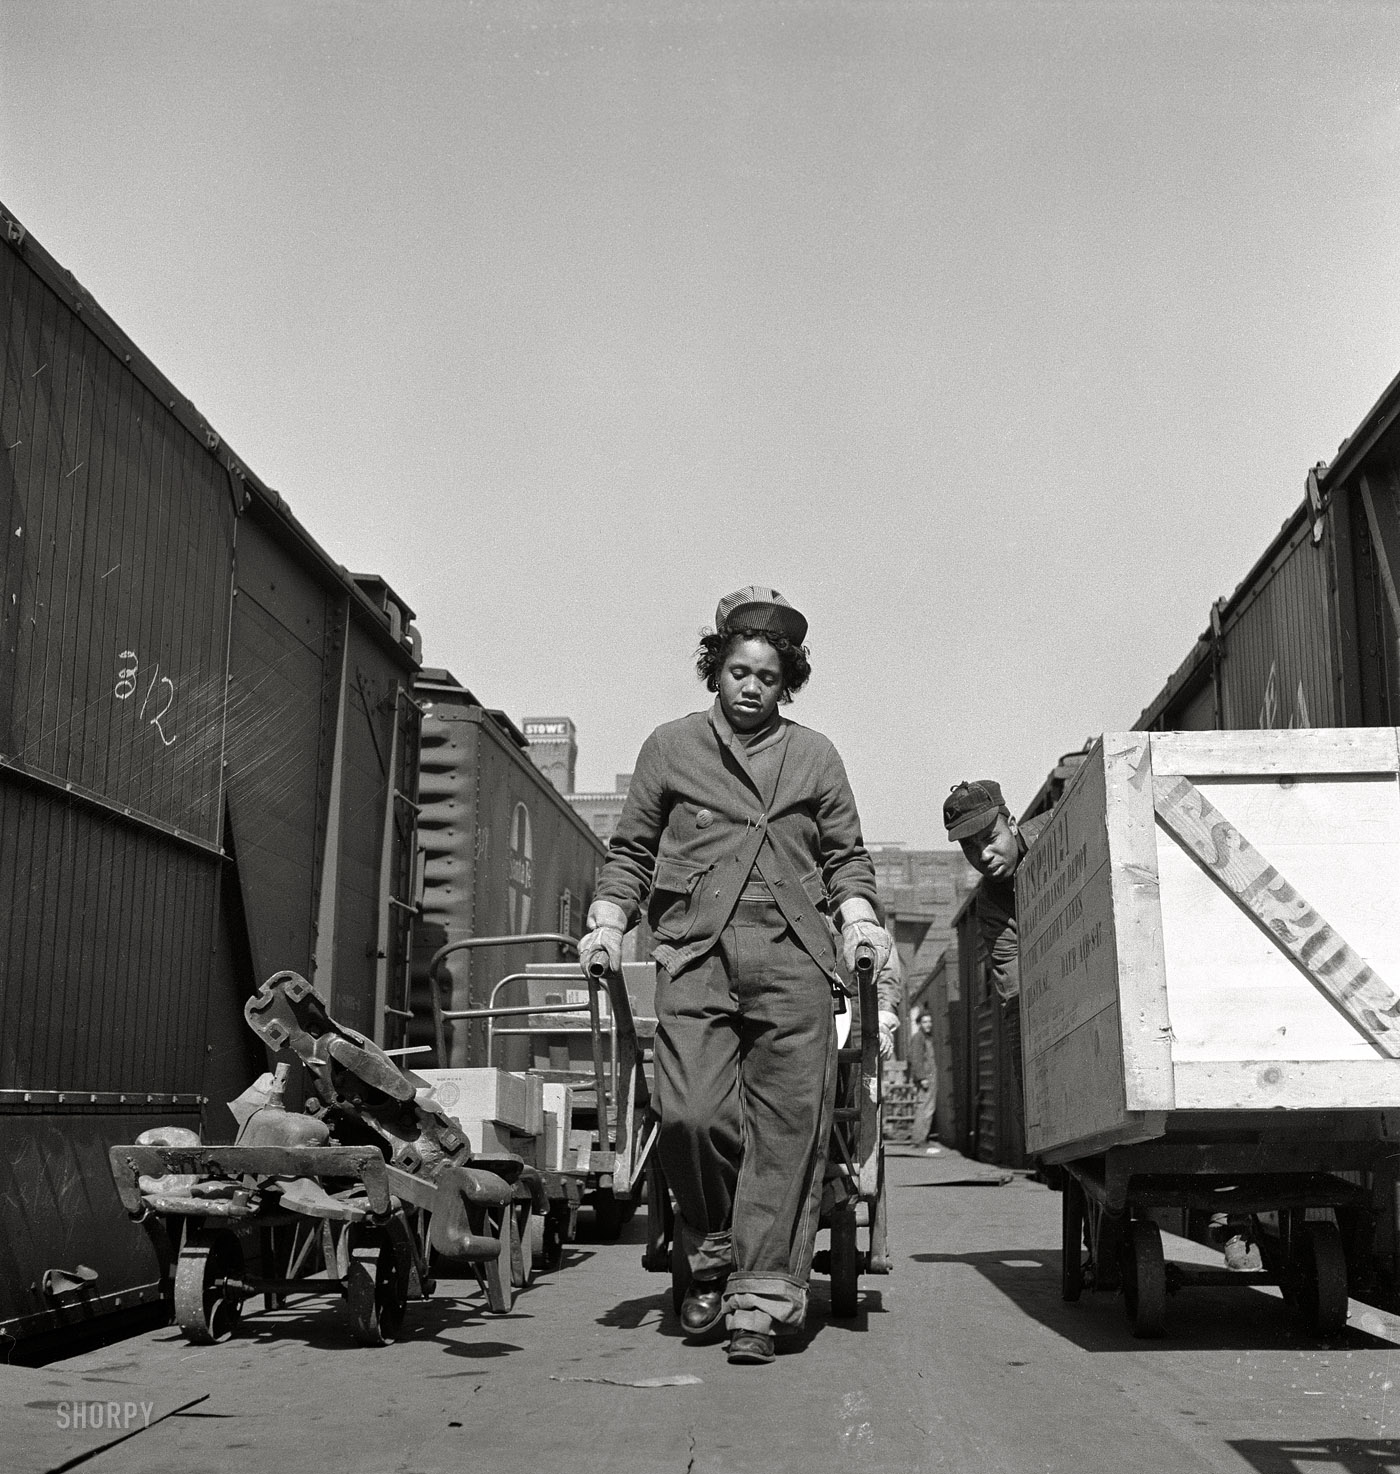 March 1943. Kansas City, Missouri. "Mildred Williams, one of several women freight handlers employed at the Atchison, Topeka, and Santa Fe depot." Medium-format negative by Jack Delano, Office of War Information. View full size.